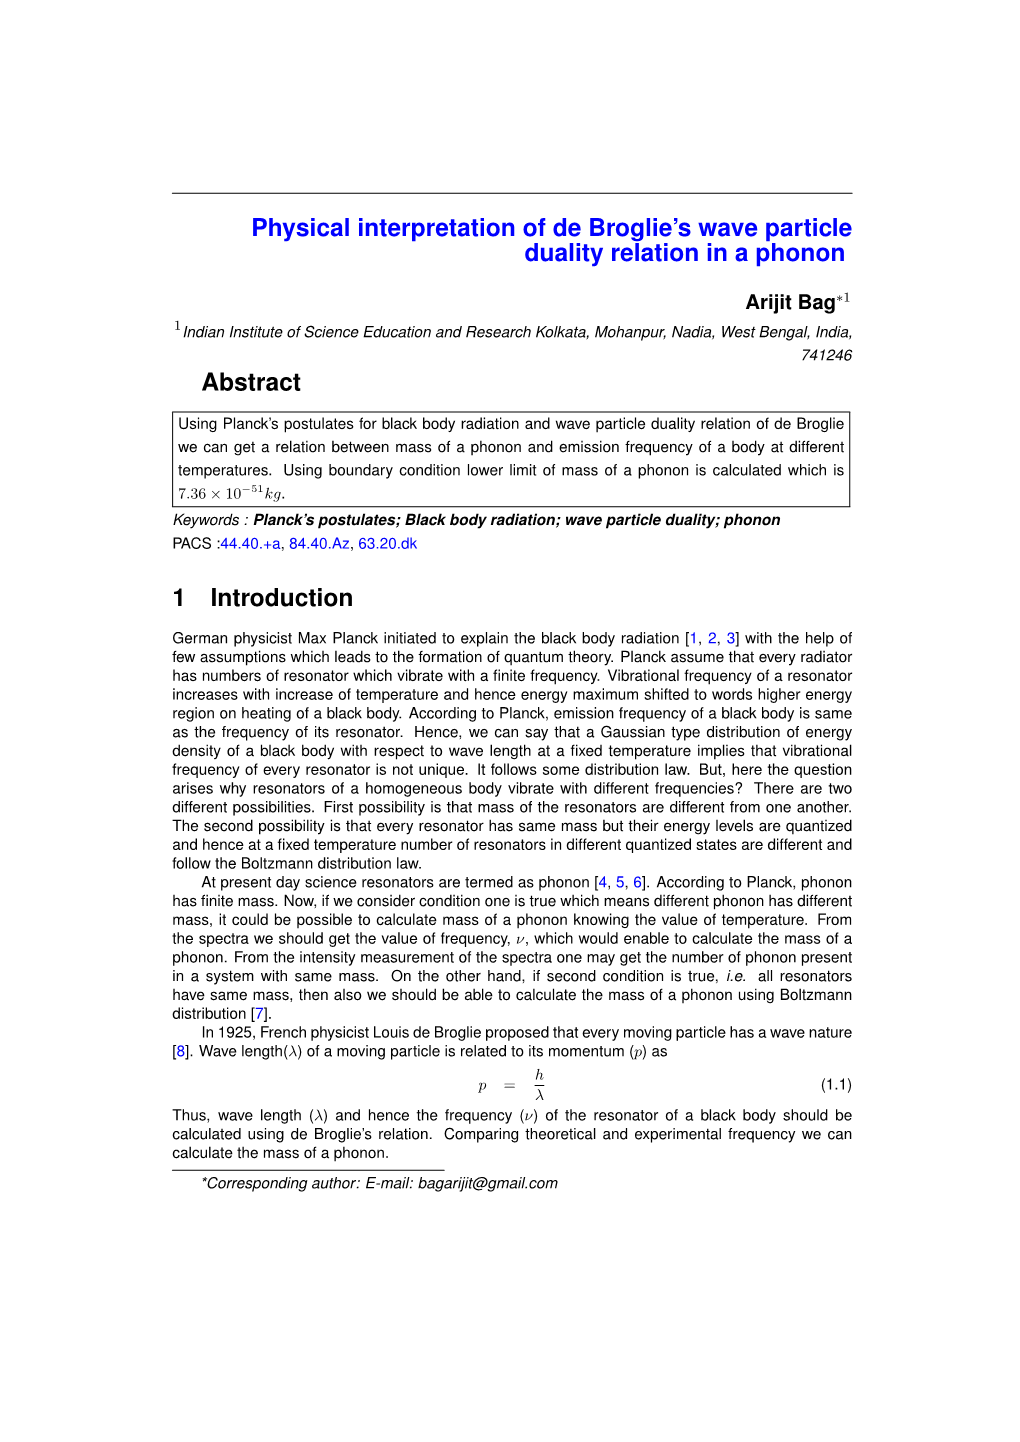 Physical Interpretation of De Broglie's Wave Particle Duality Relation in A